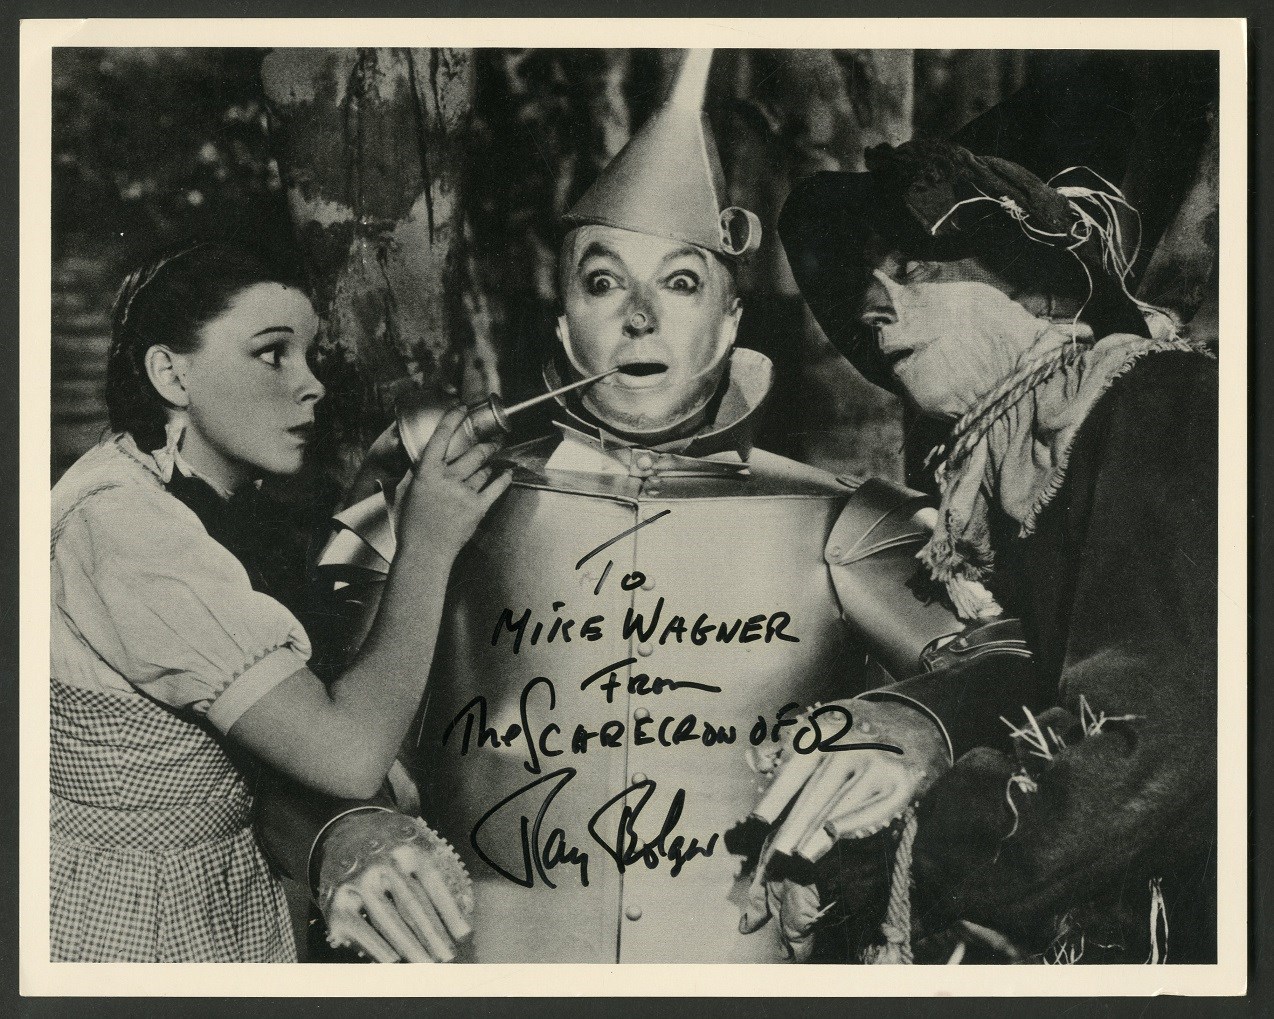 Rock And Pop Culture - Exceptional Ray Bolger Signed Inscribed "The Scarecrow of Oz" Photograph